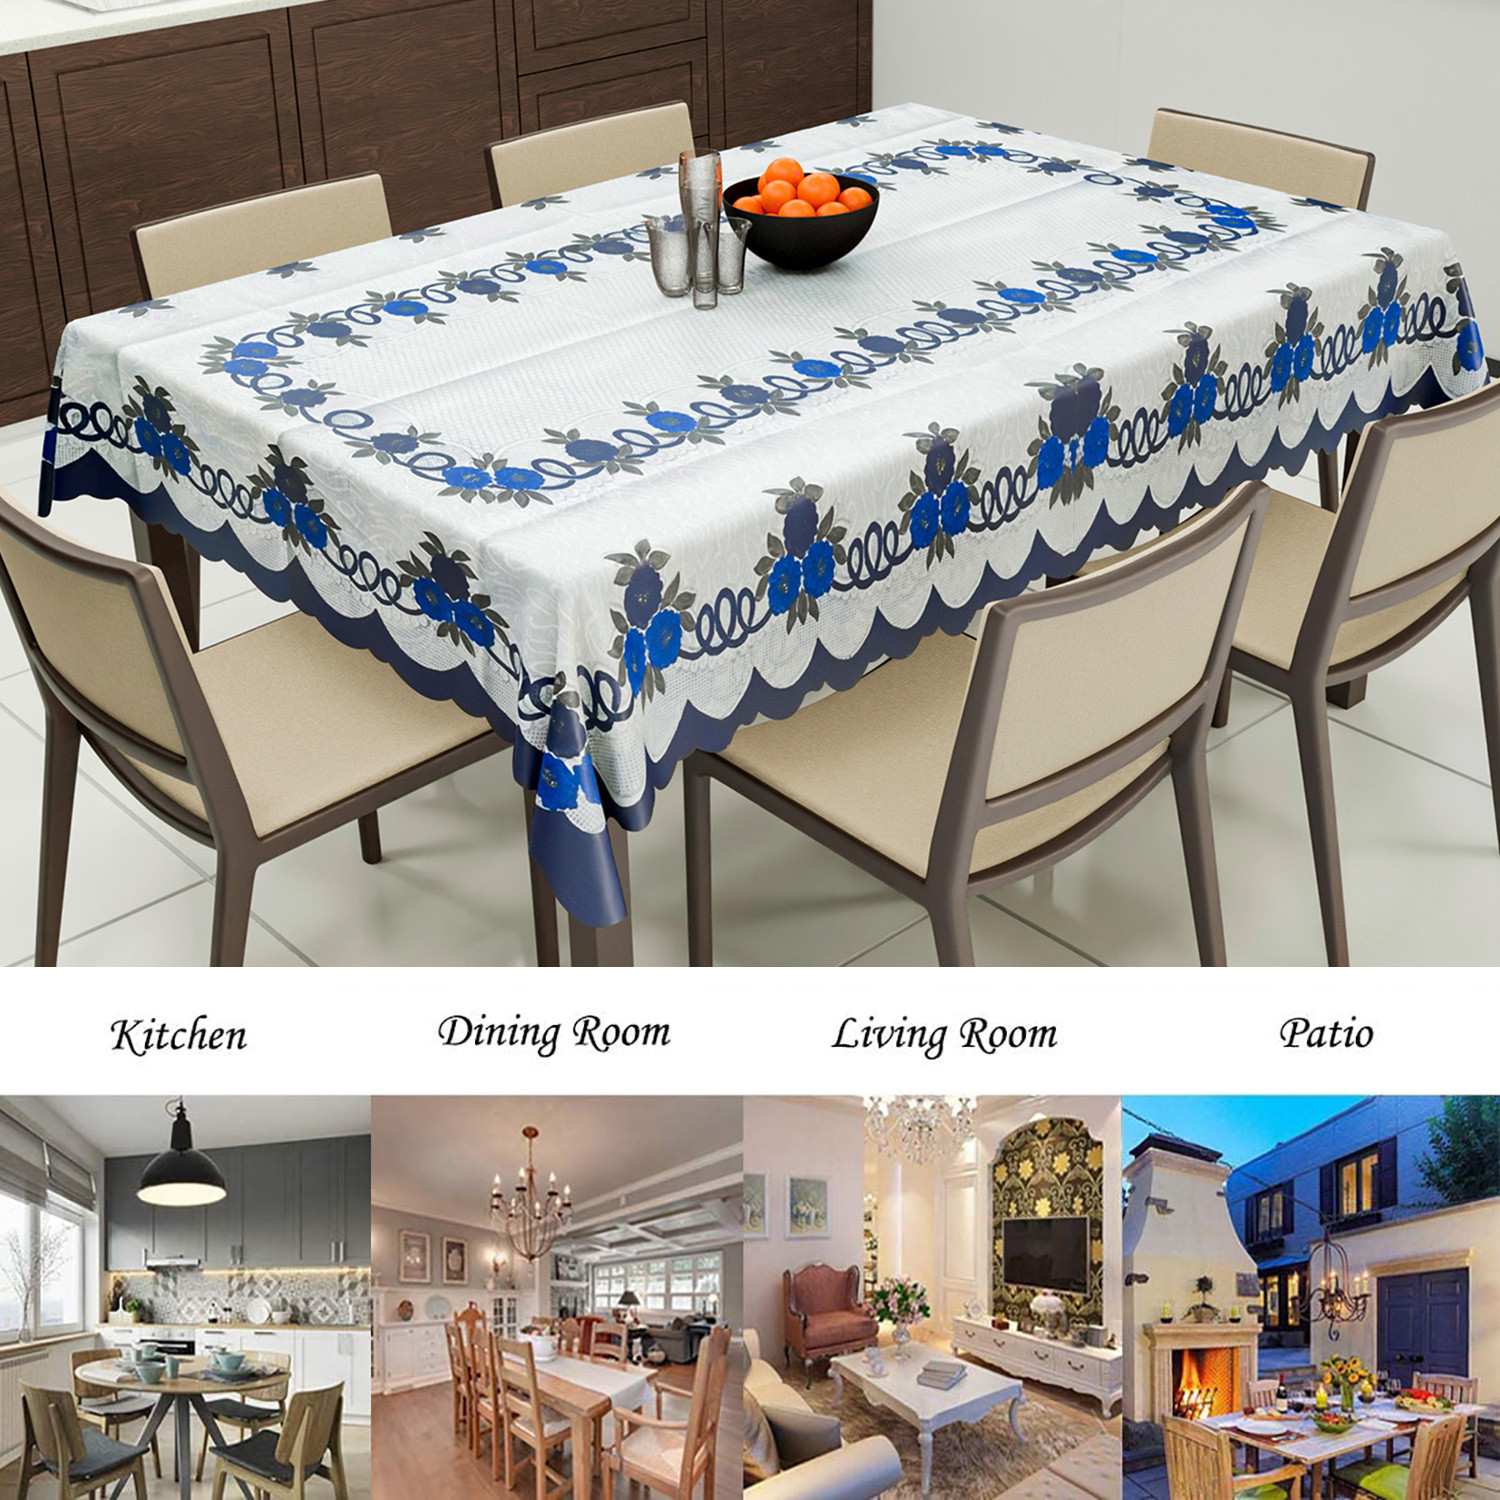 Kuber Industries Cotton Floral Print Waterproof Attractive Dining Table Cover|Tablecloth for Home Decorative, 60x90 Inch (White Blue)